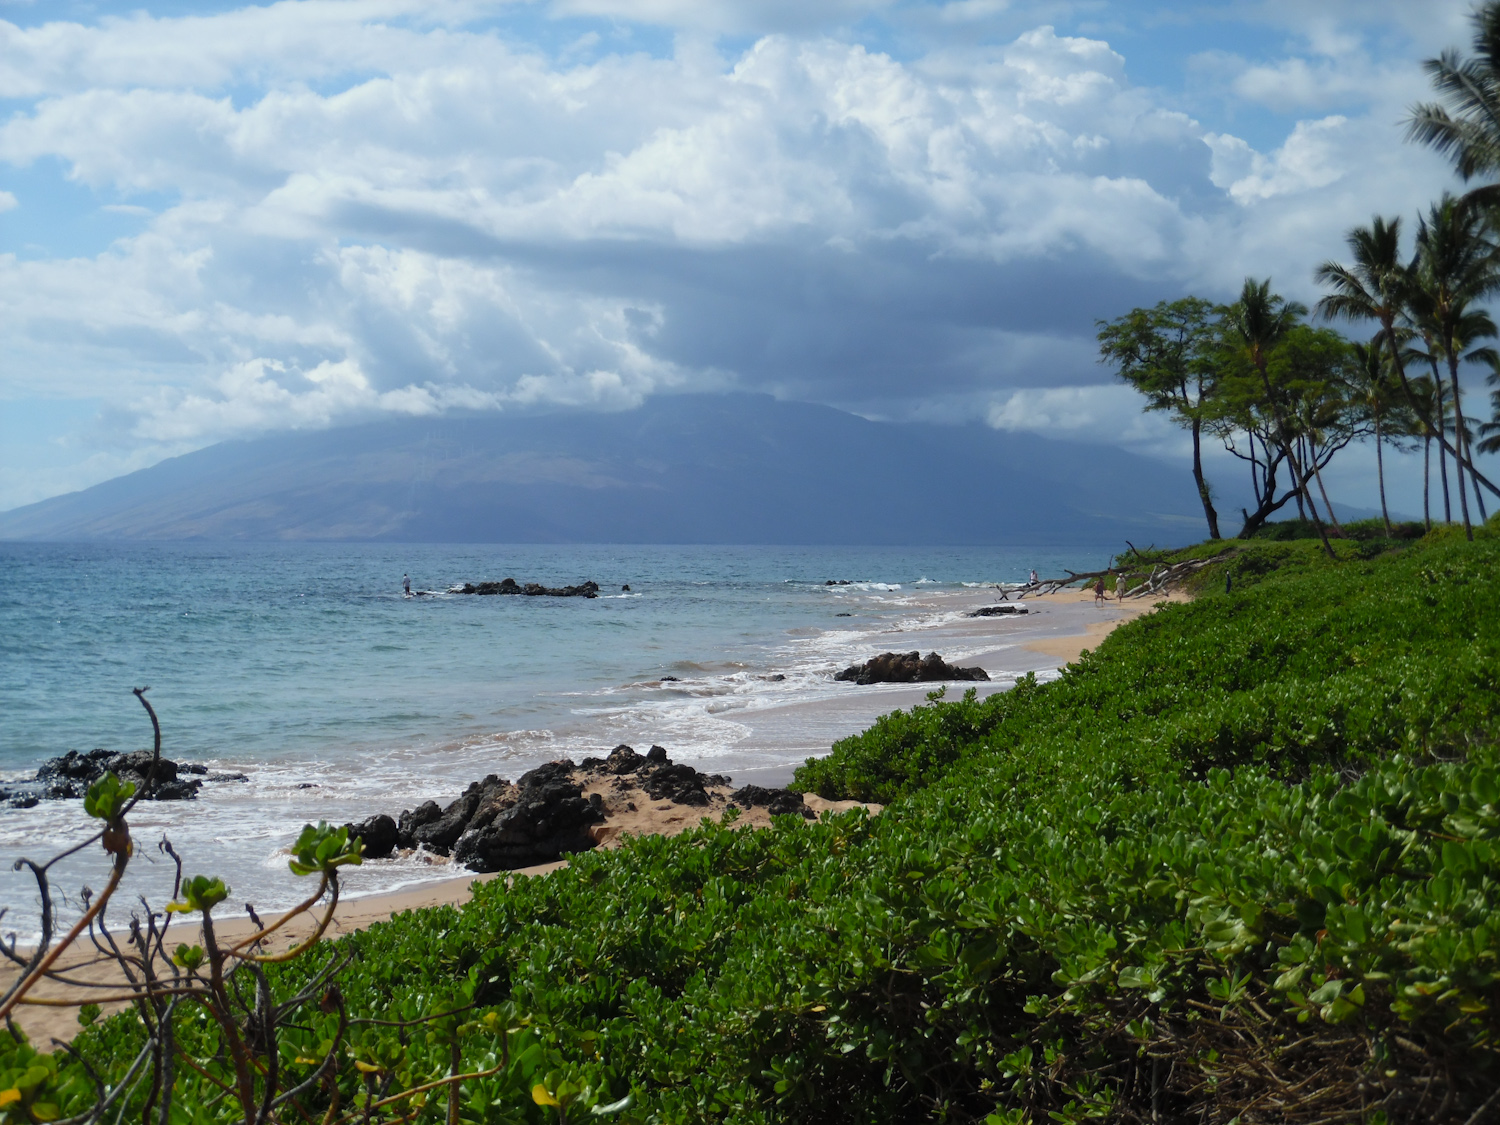 View of Mokapu Beach looking NW towards the west side of Maui